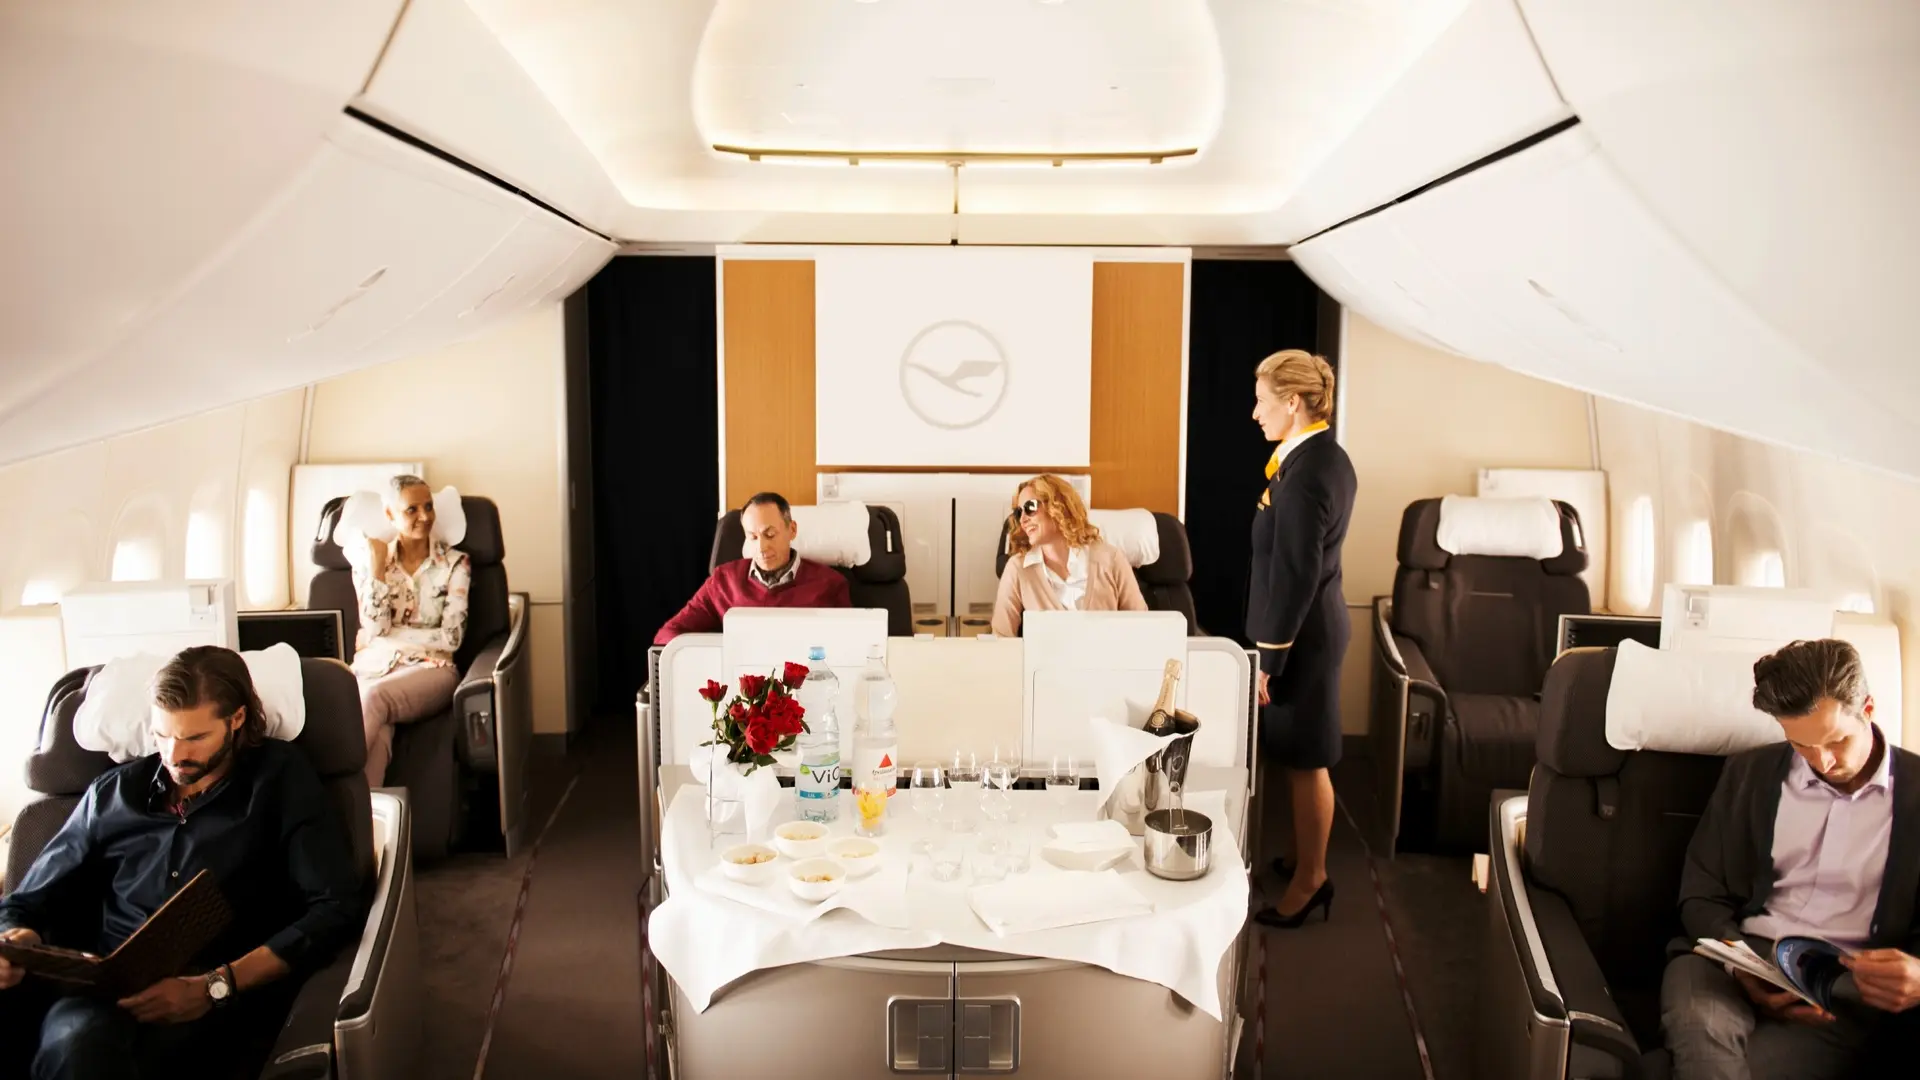 Airline review Cabin & Seat - Lufthansa - 1